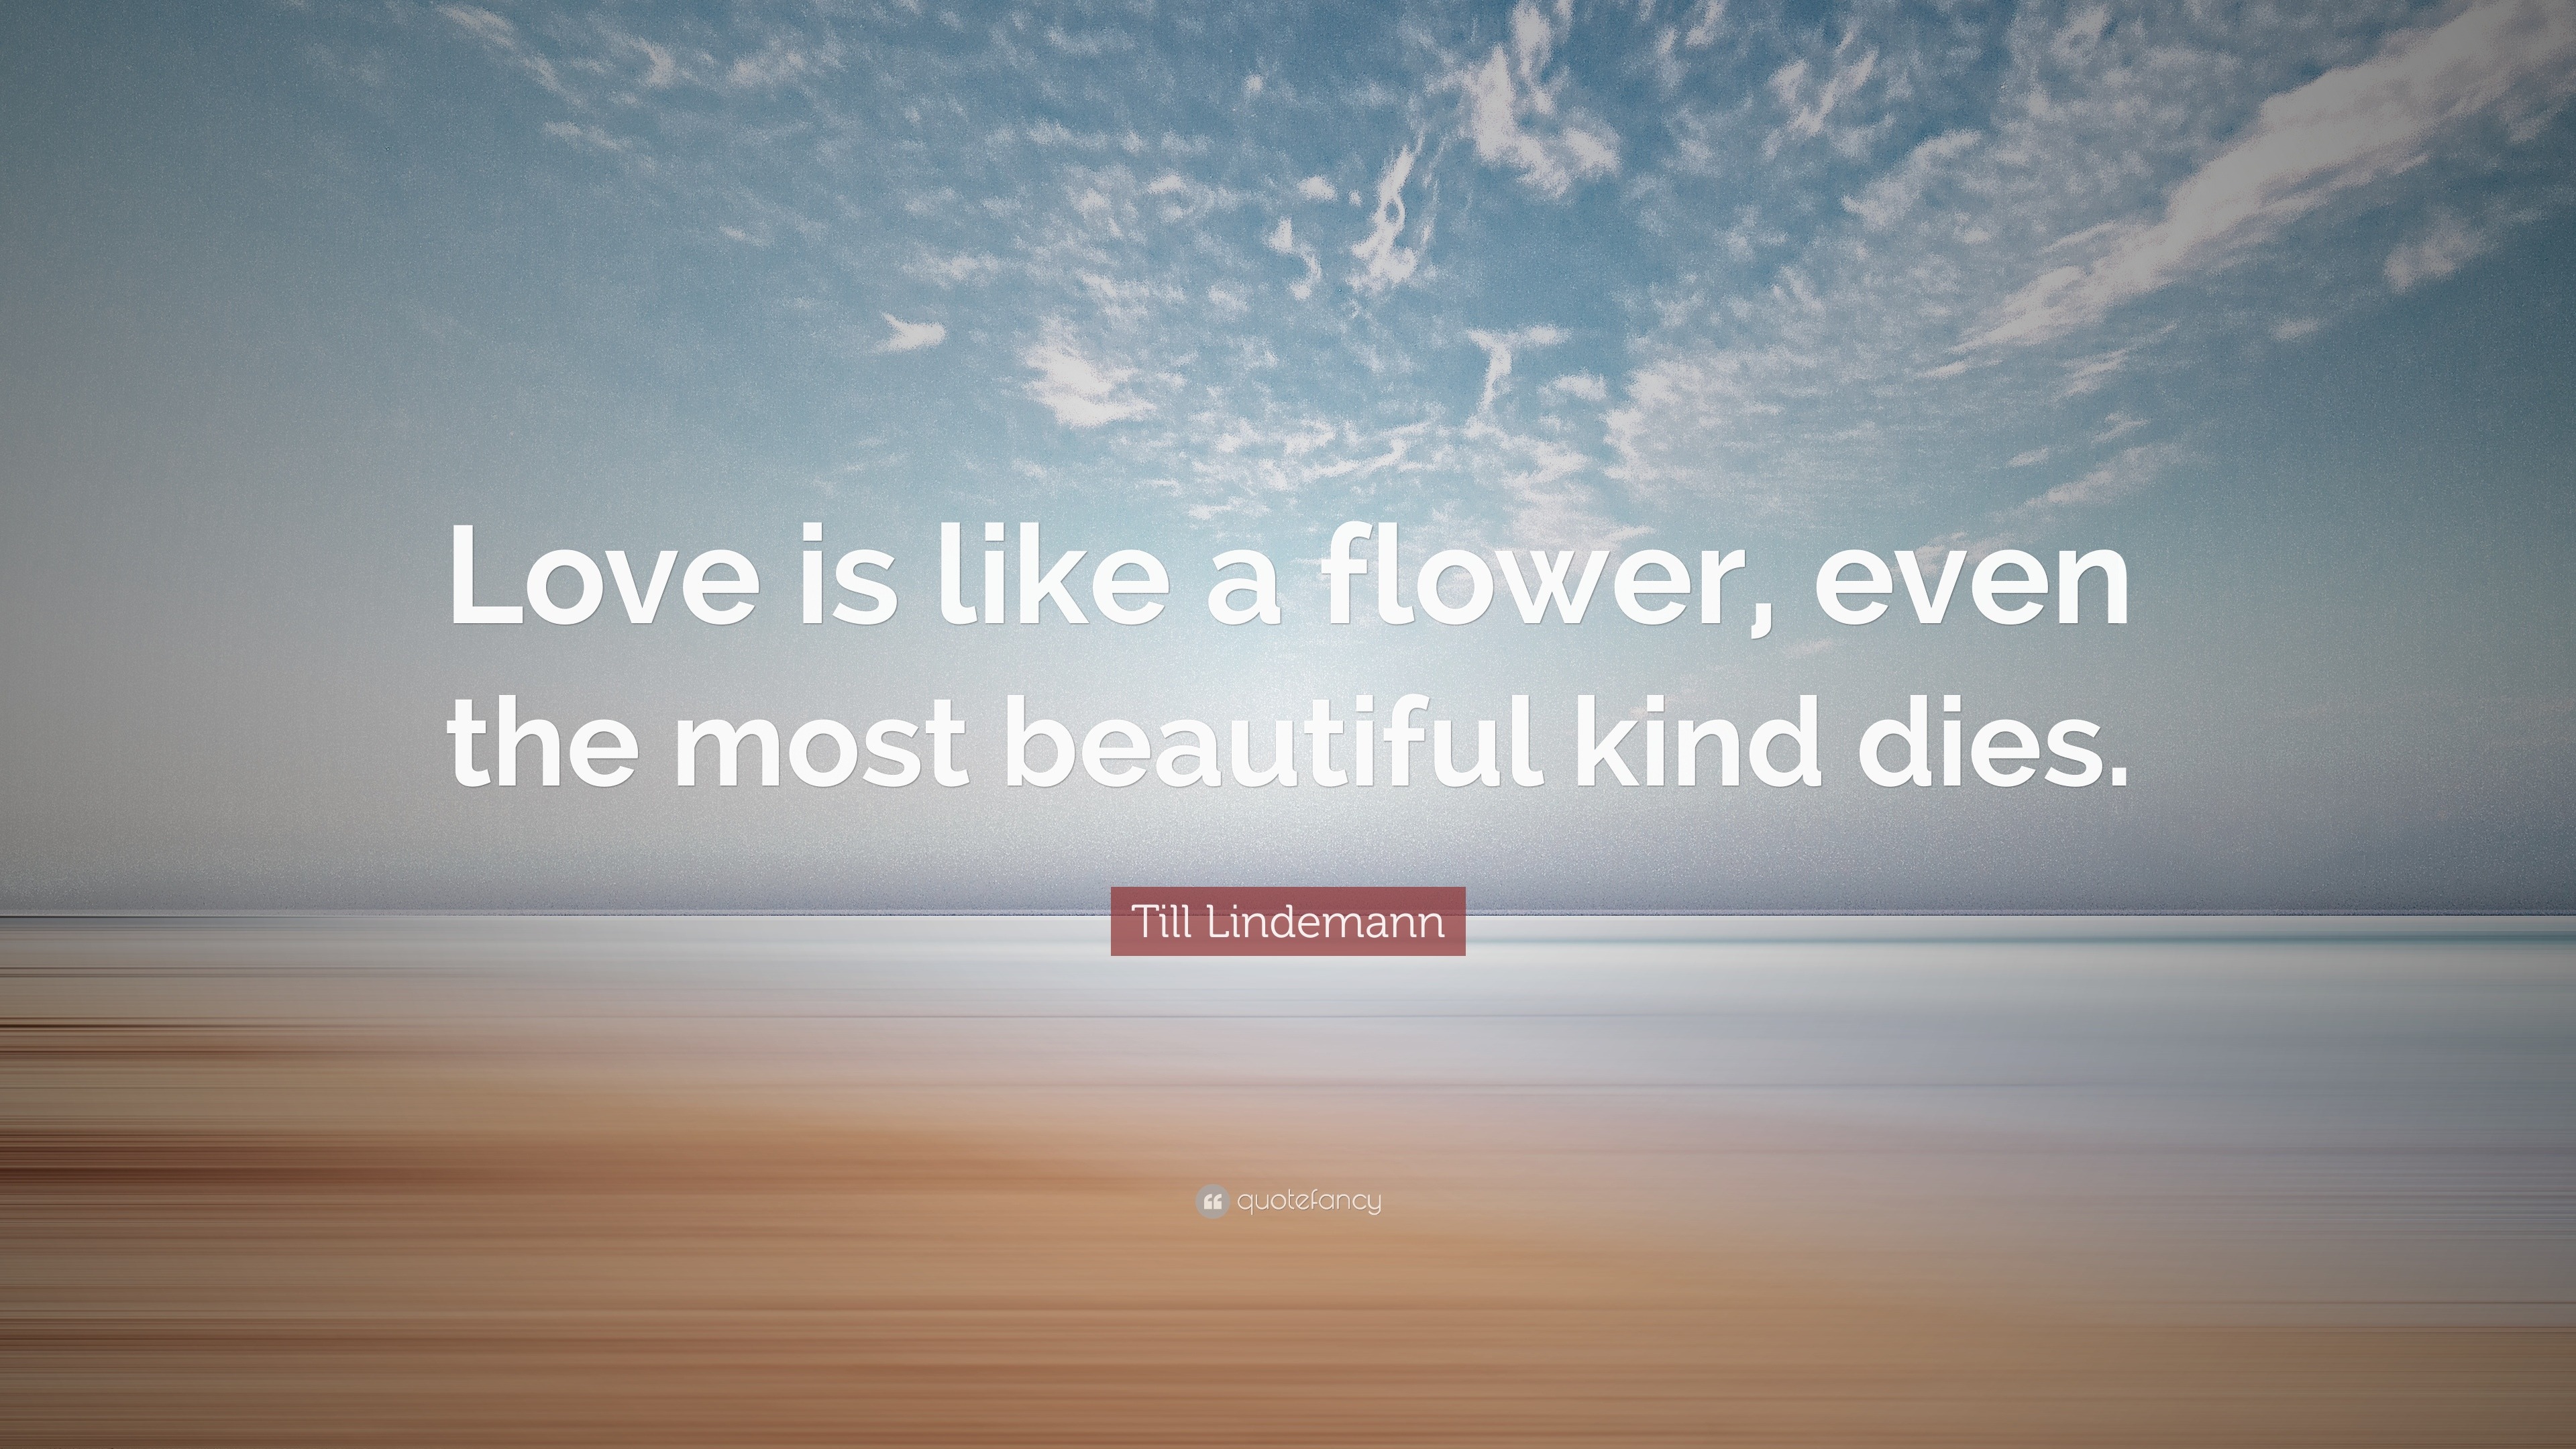 Till Lindemann Quote “Love is like a flower even the most beautiful kind